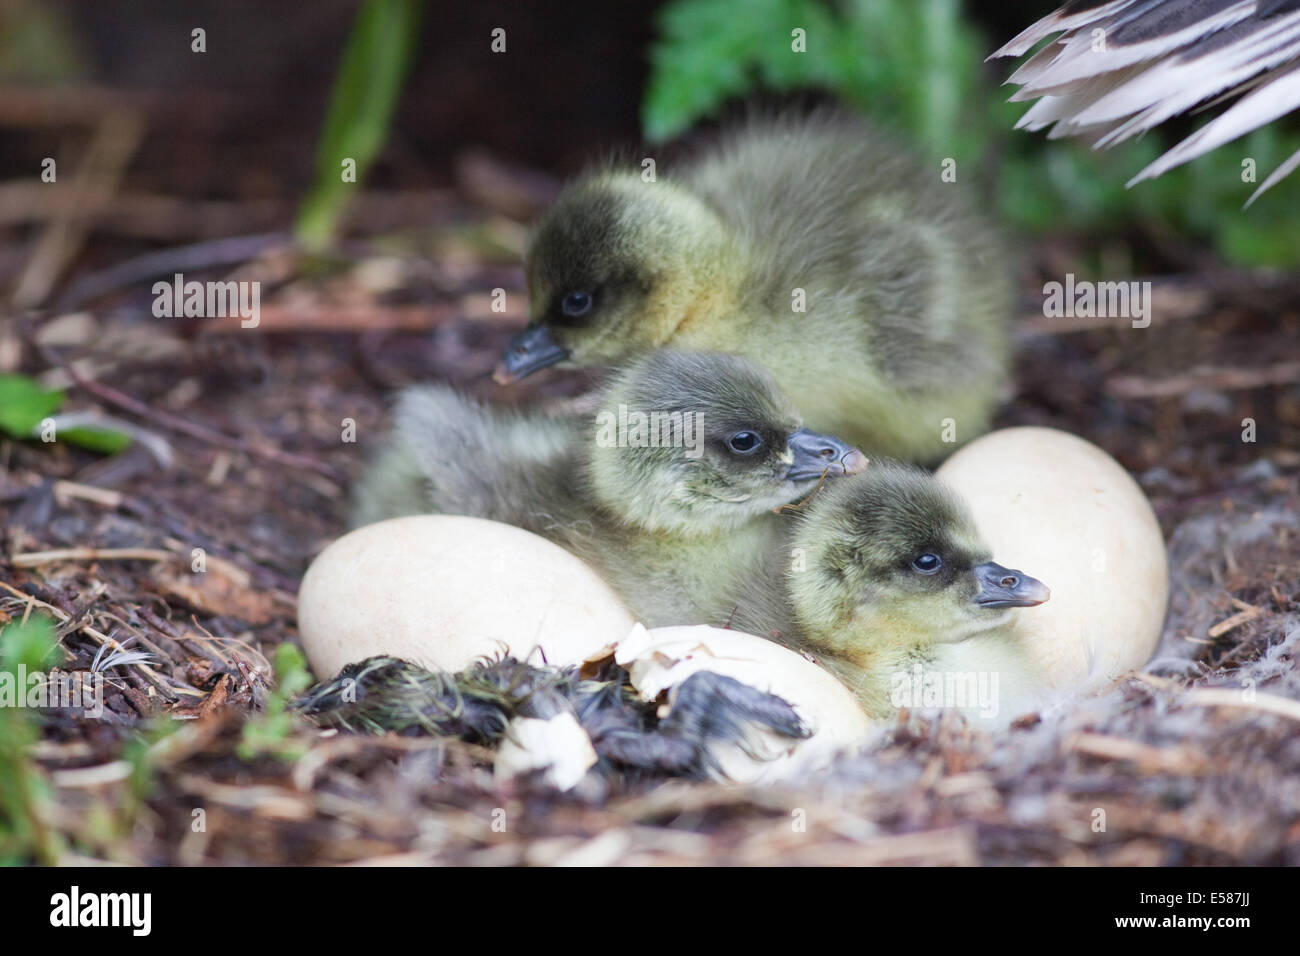 Pink-footed Goose (Anser brachyrhynchus).  'Downy' goslings hatching. Adult, parent bird's tail top right. Stock Photo